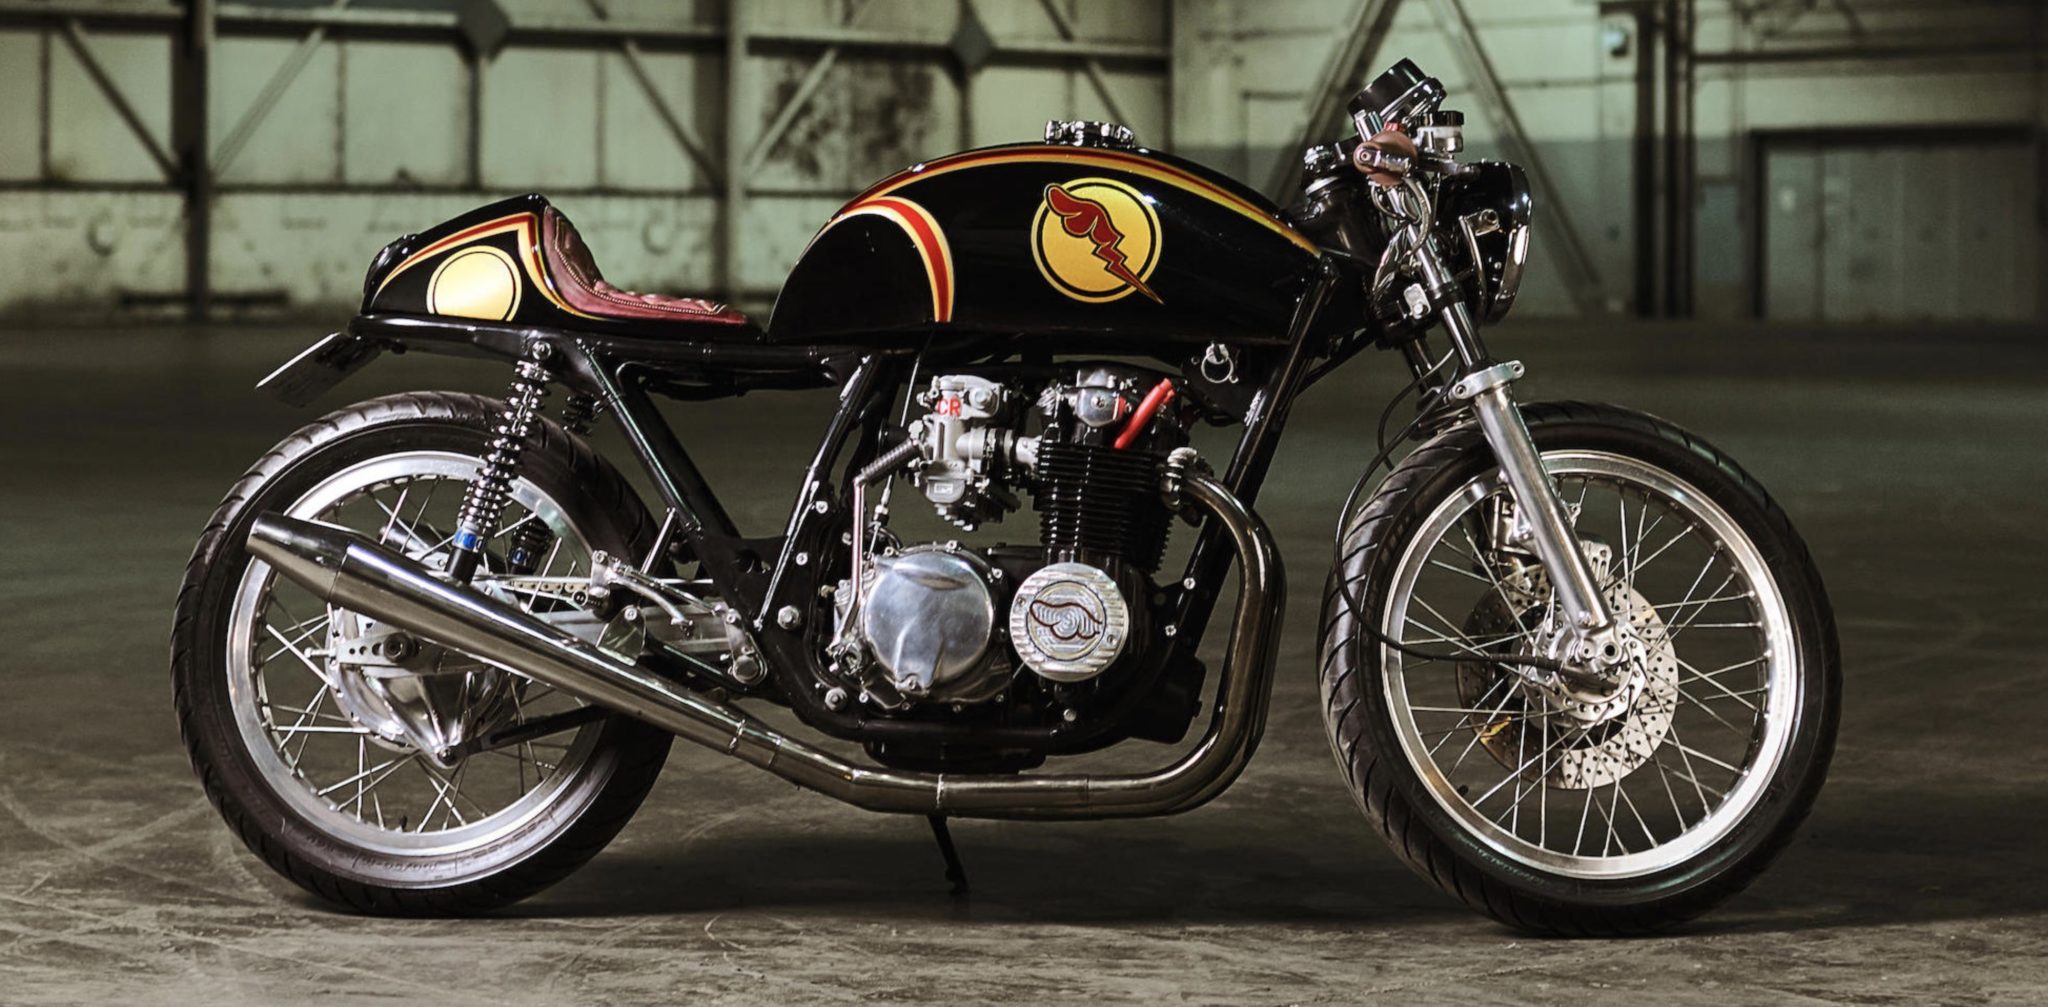 Three (Affordable) Custom Motorcycles Built By British Street Artist D*Face